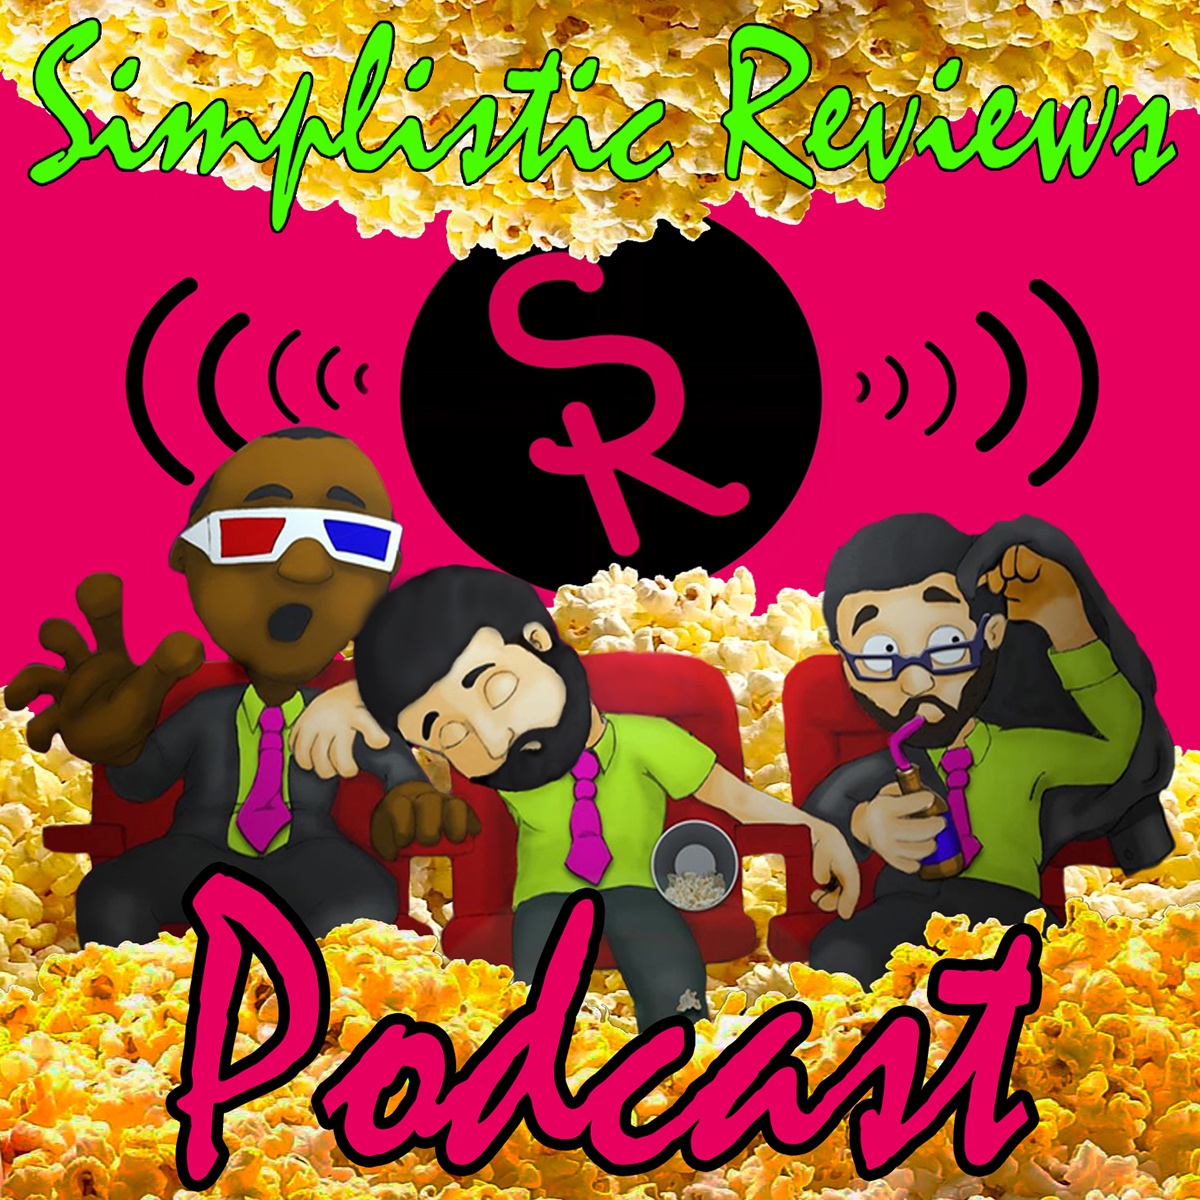 (Ep. 8): SR Podcast - May 2013